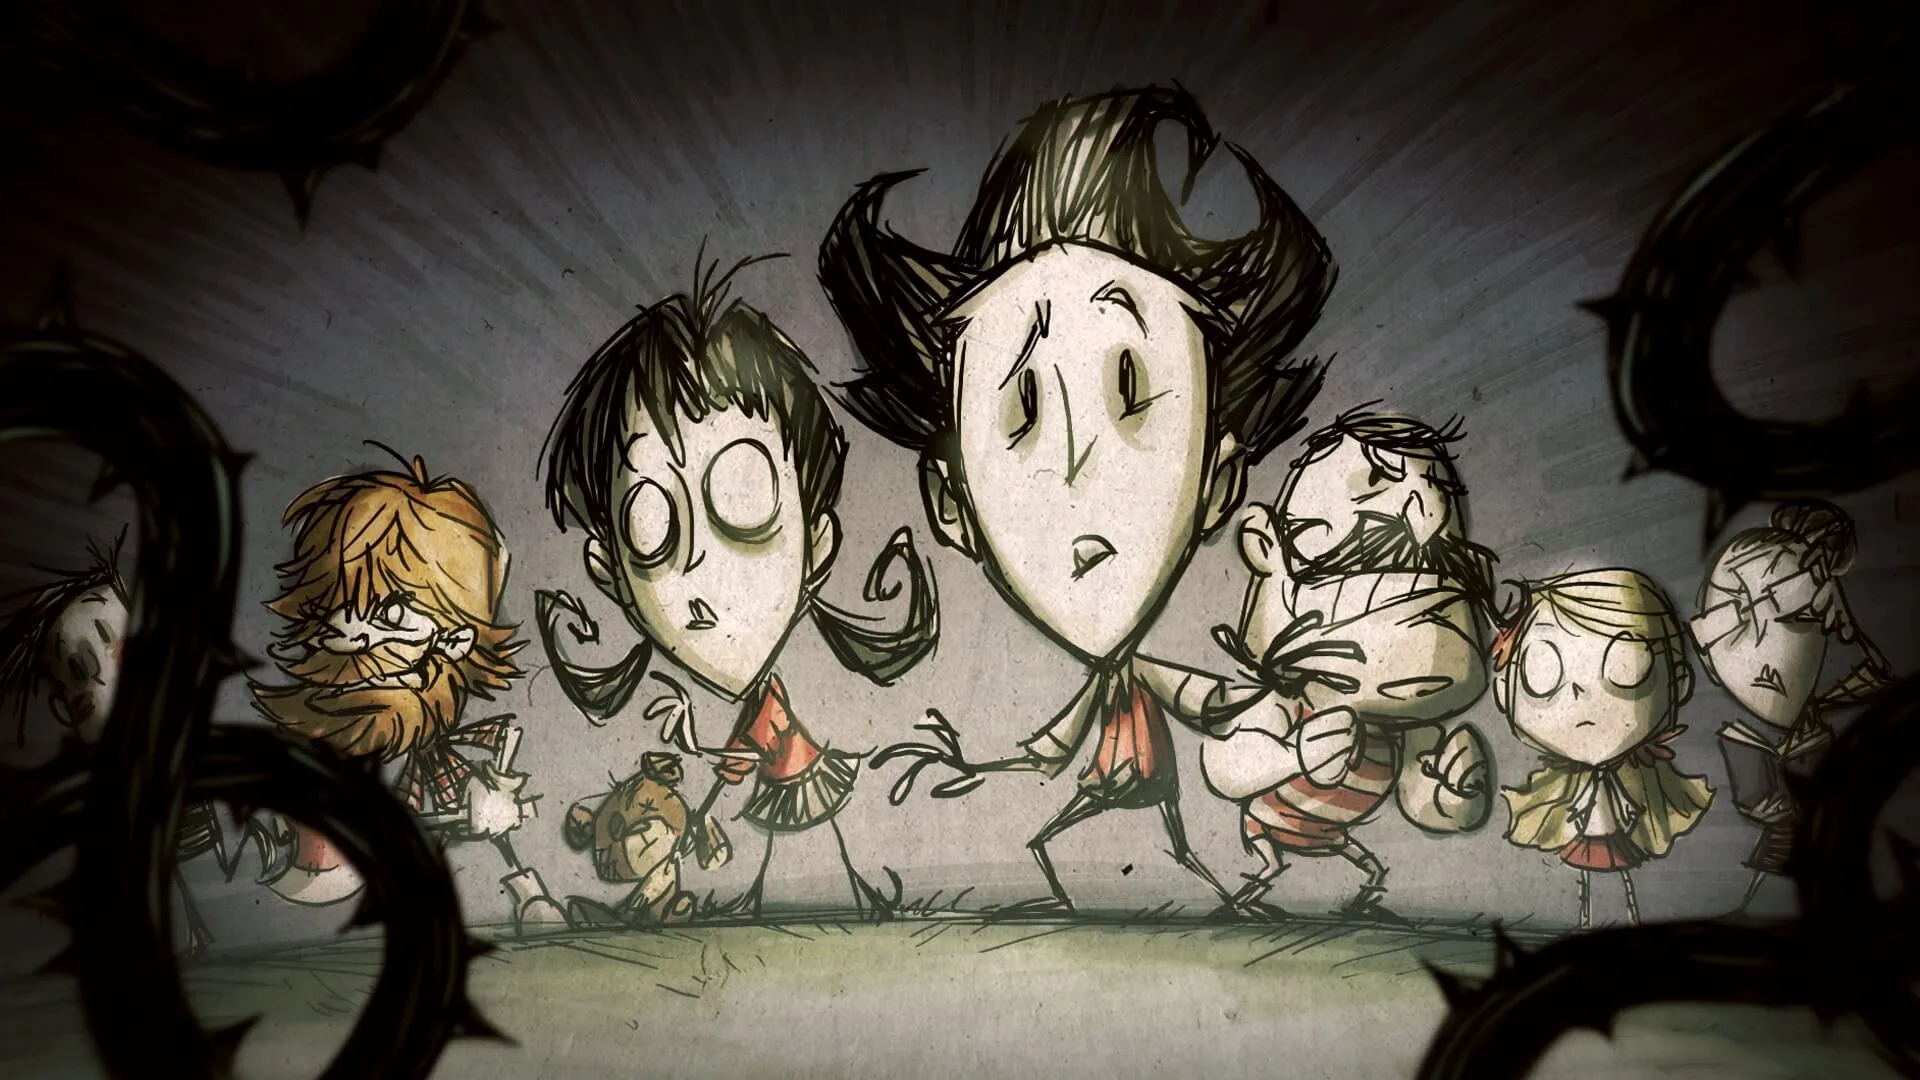 Донт старв длс. Донт старв. Don't Starve мир. Don't Starve together мир. Донт старв тугезер.